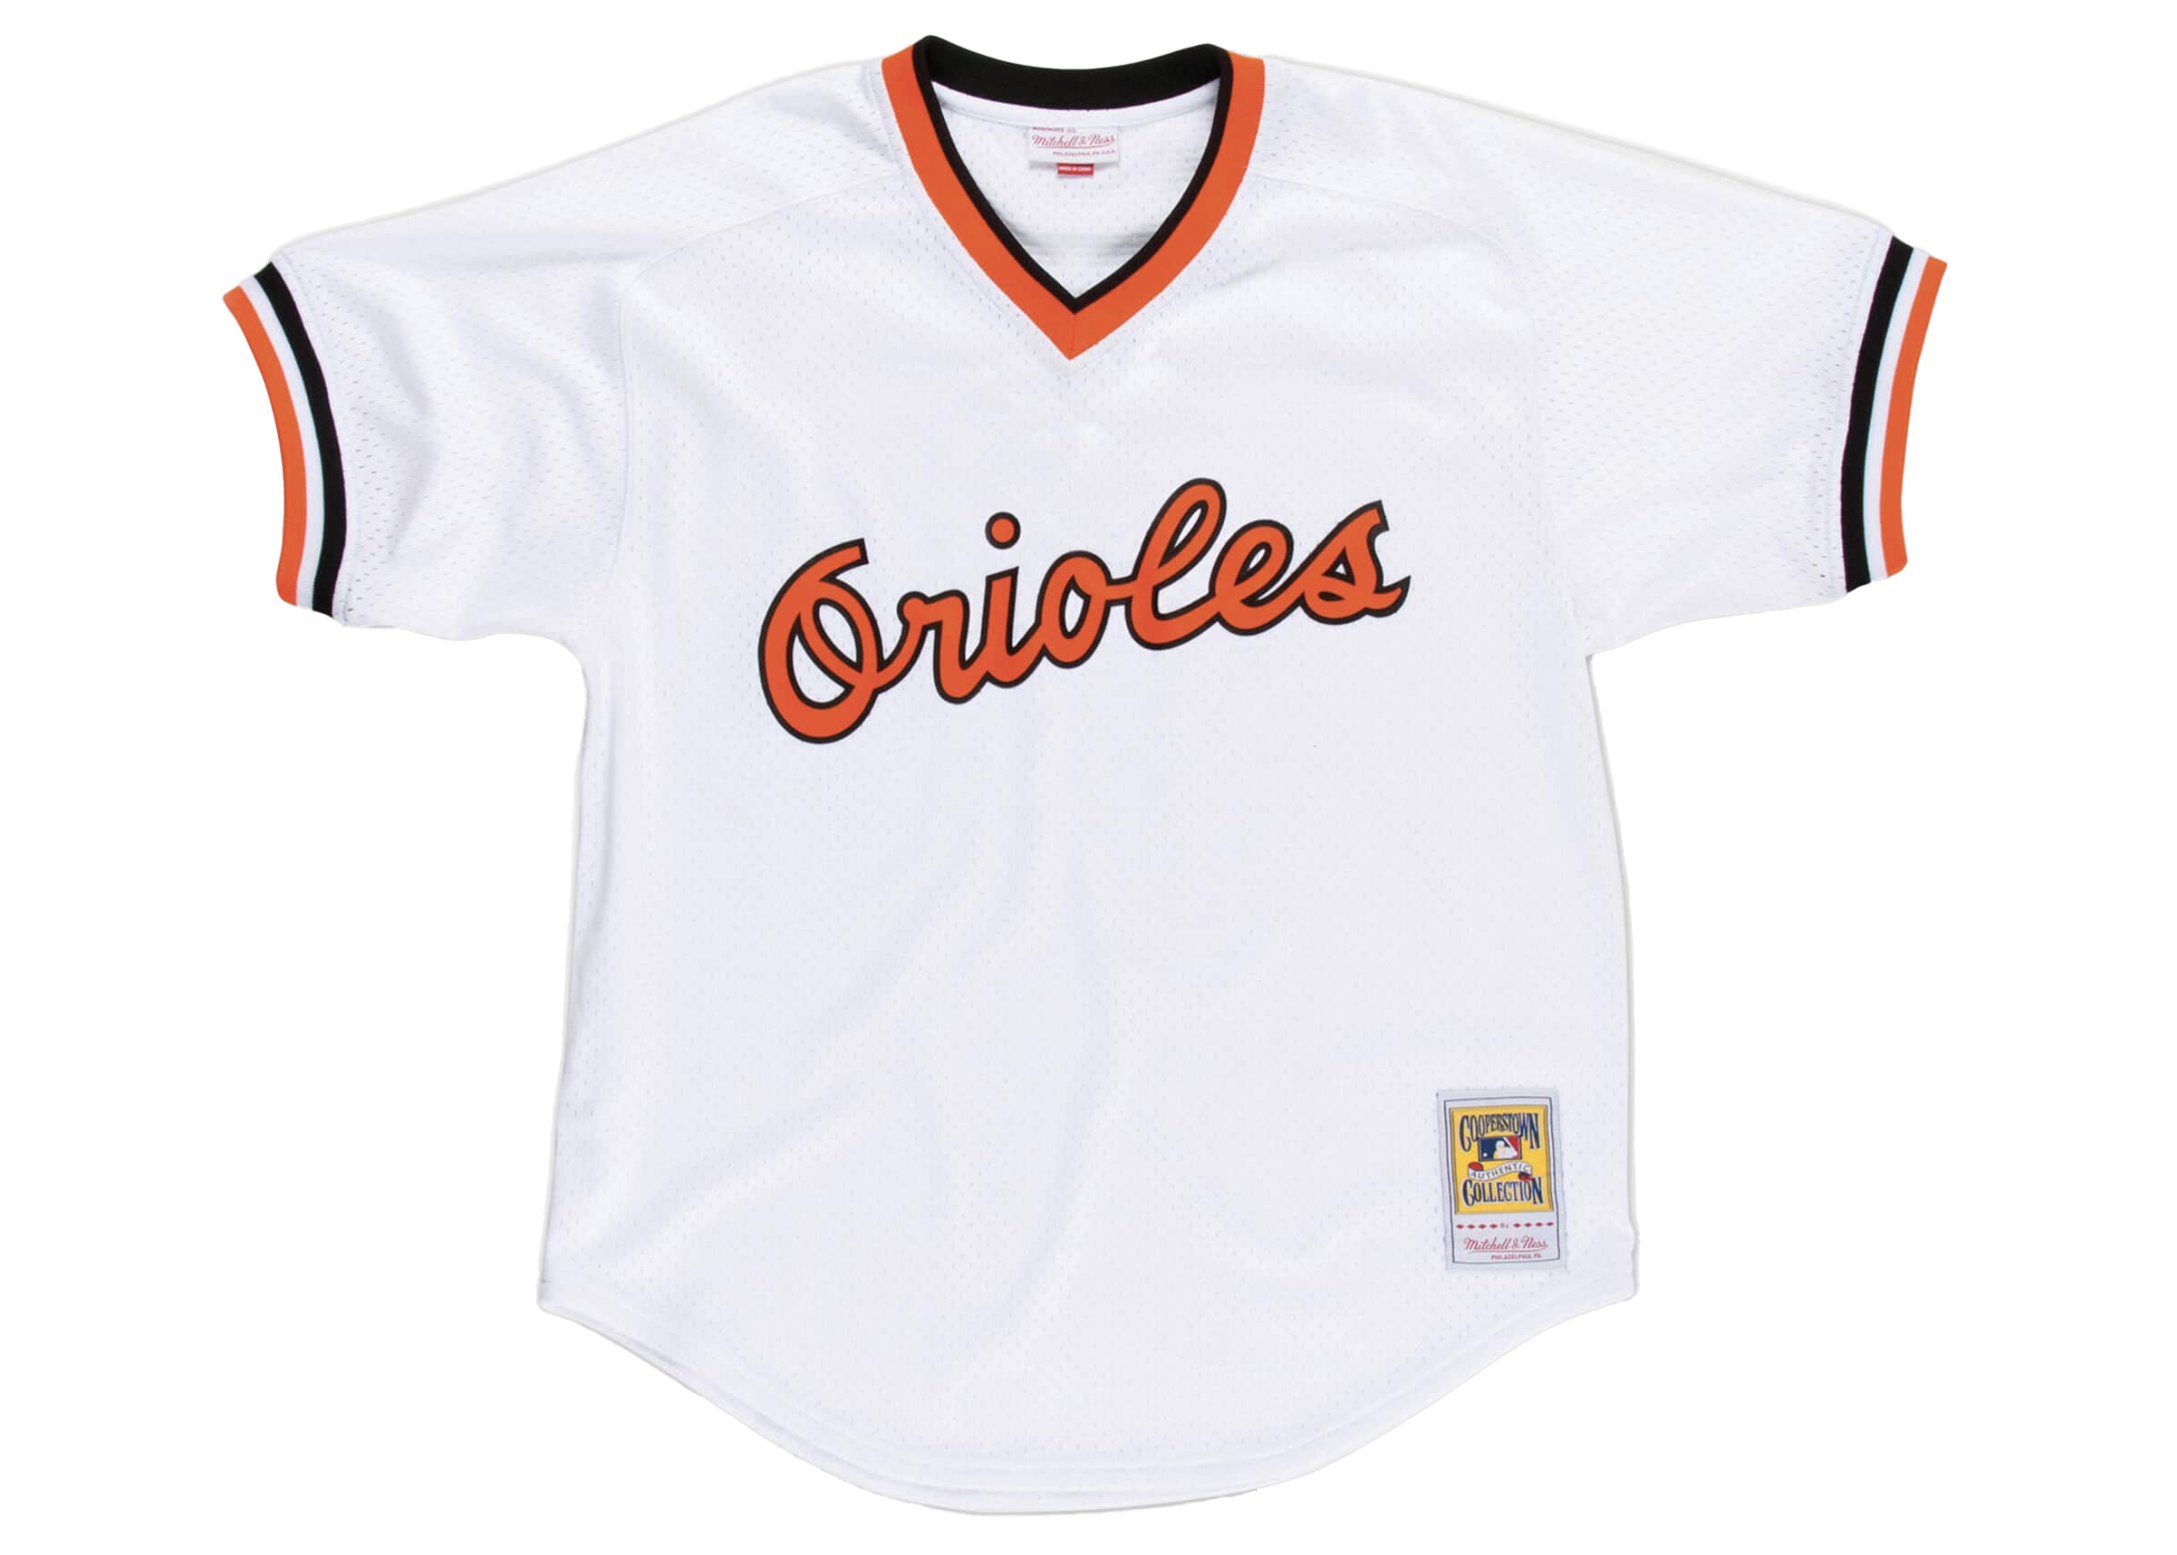 Authentic Orioles jersey